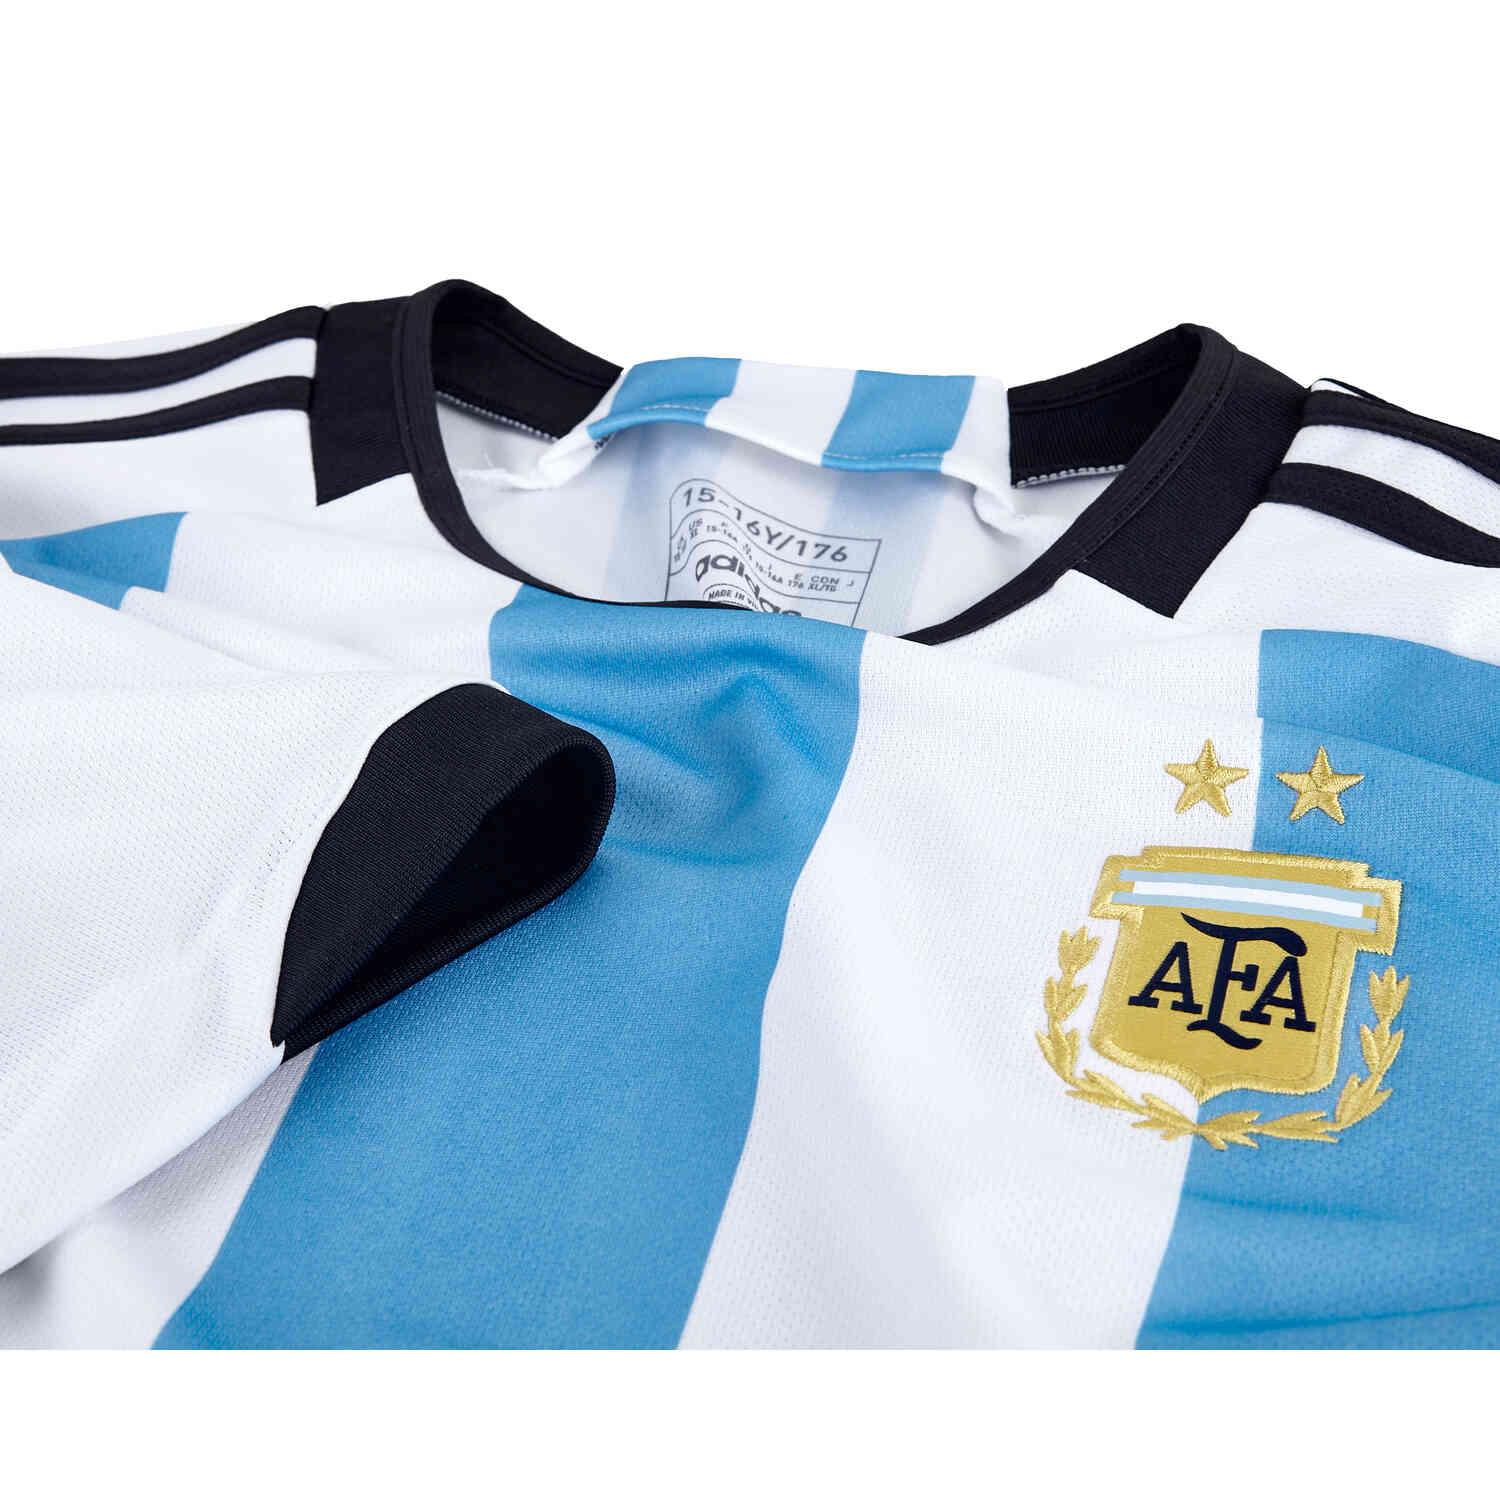 Adidas Argentina Jersey - Buy Adidas Argentina Jersey online in India